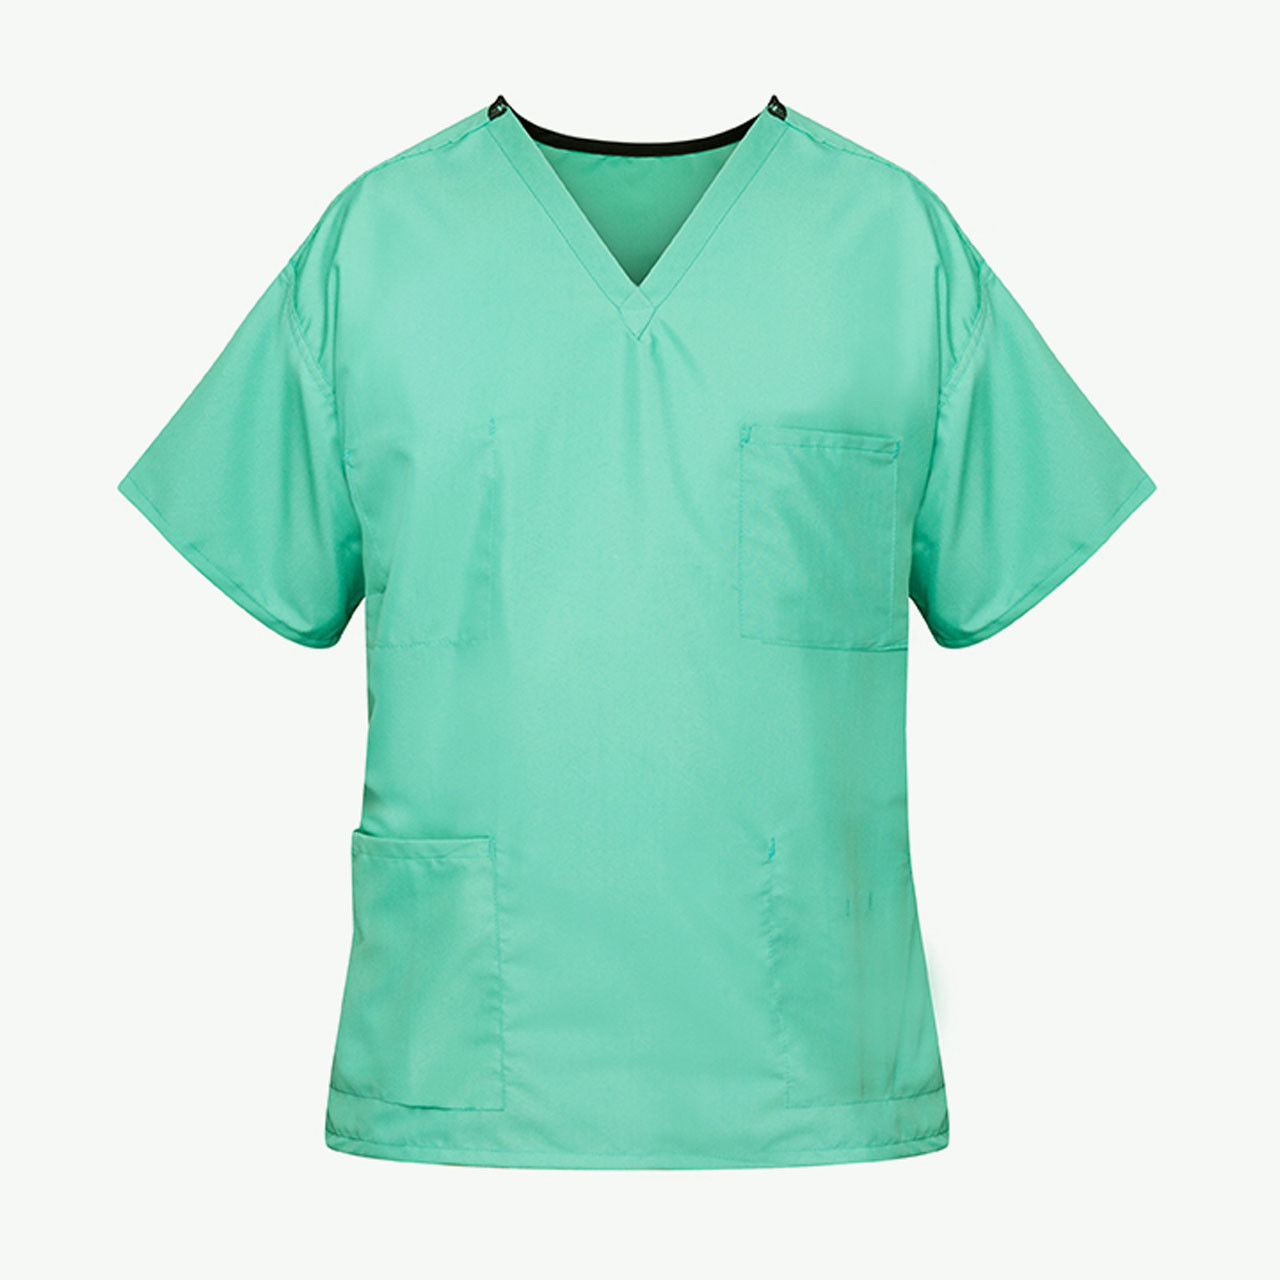 What are the key features of the High-quality Jade Green Scrub Tops?